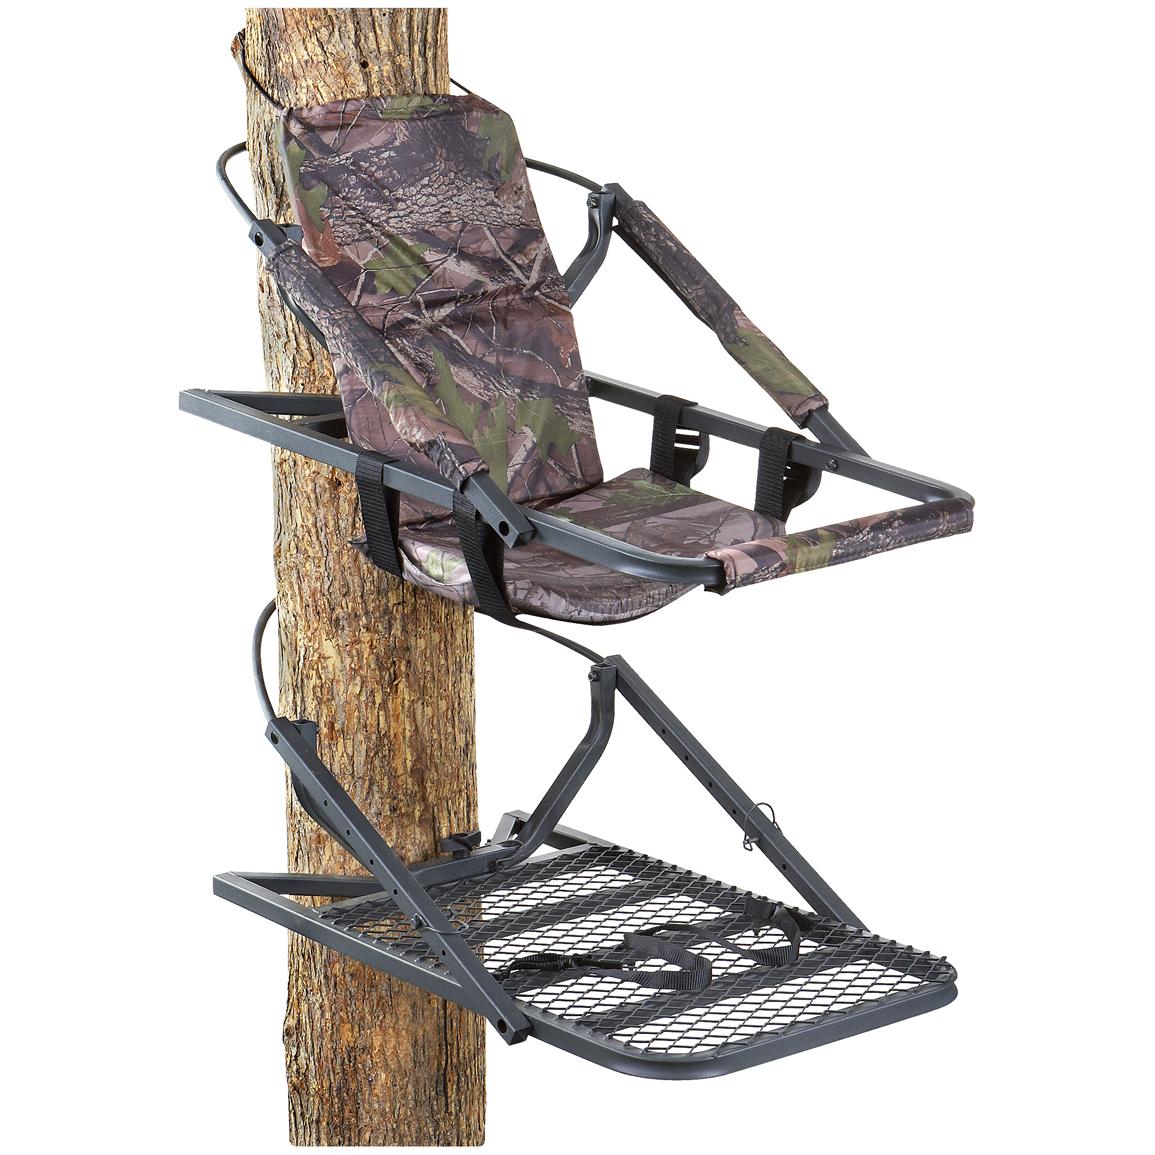 Guide Gear Extreme Deluxe Hunting Climber Tree Stand Climbing